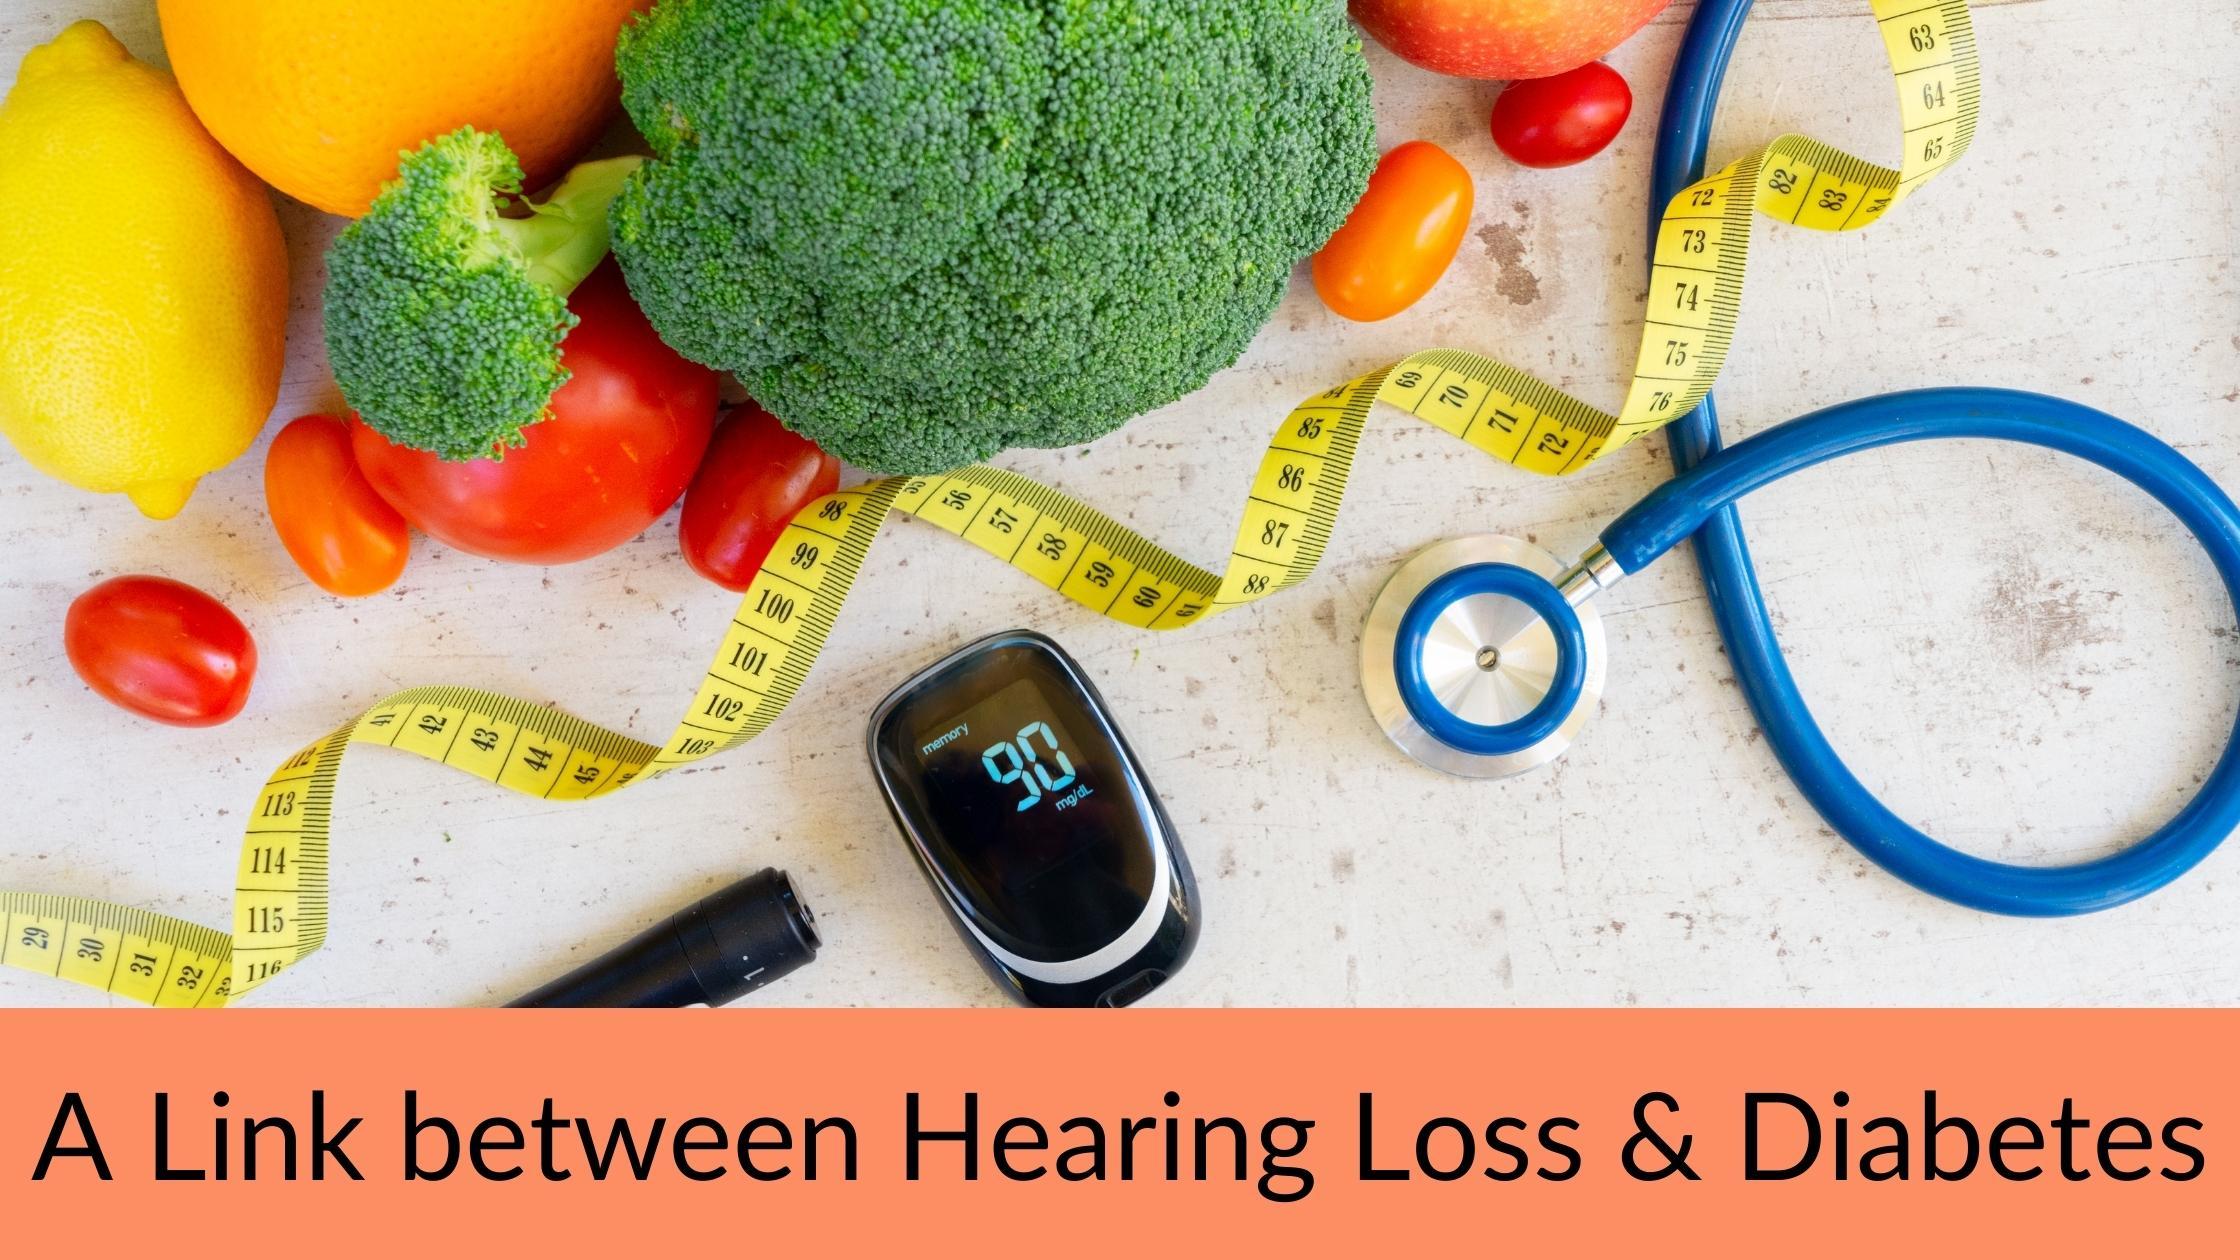 Featured image for “A Link Between Hearing Loss & Diabetes”